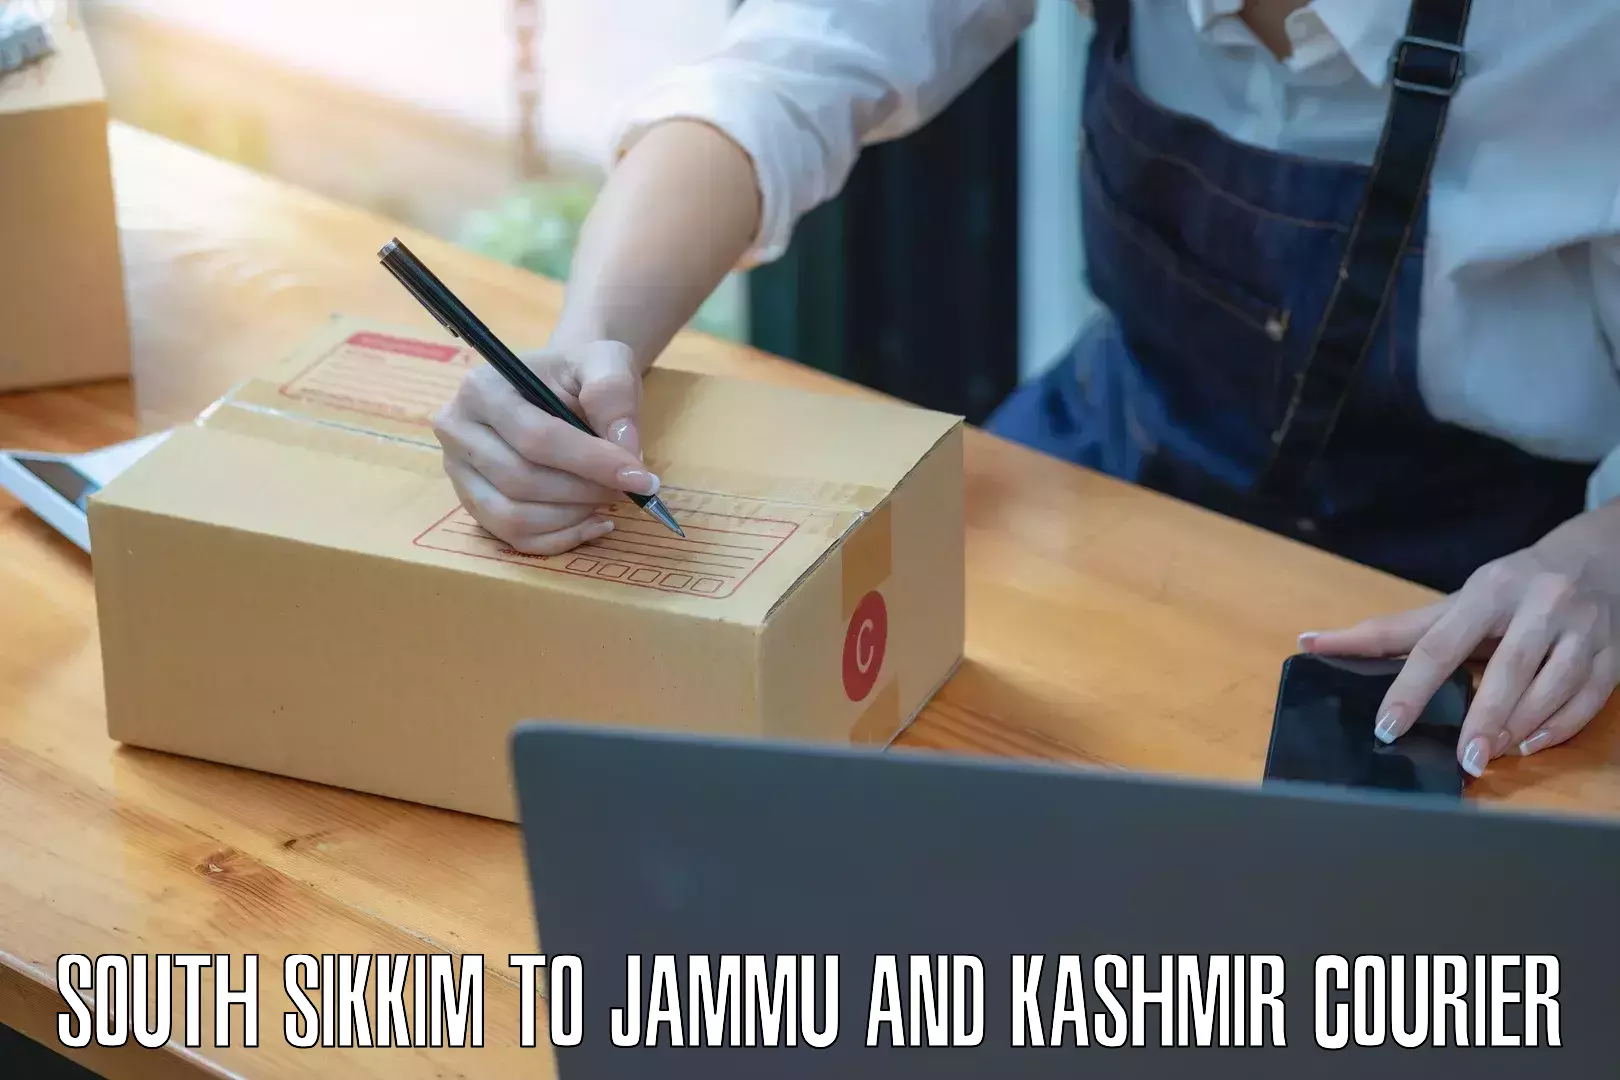 State-of-the-art courier technology in South Sikkim to Anantnag